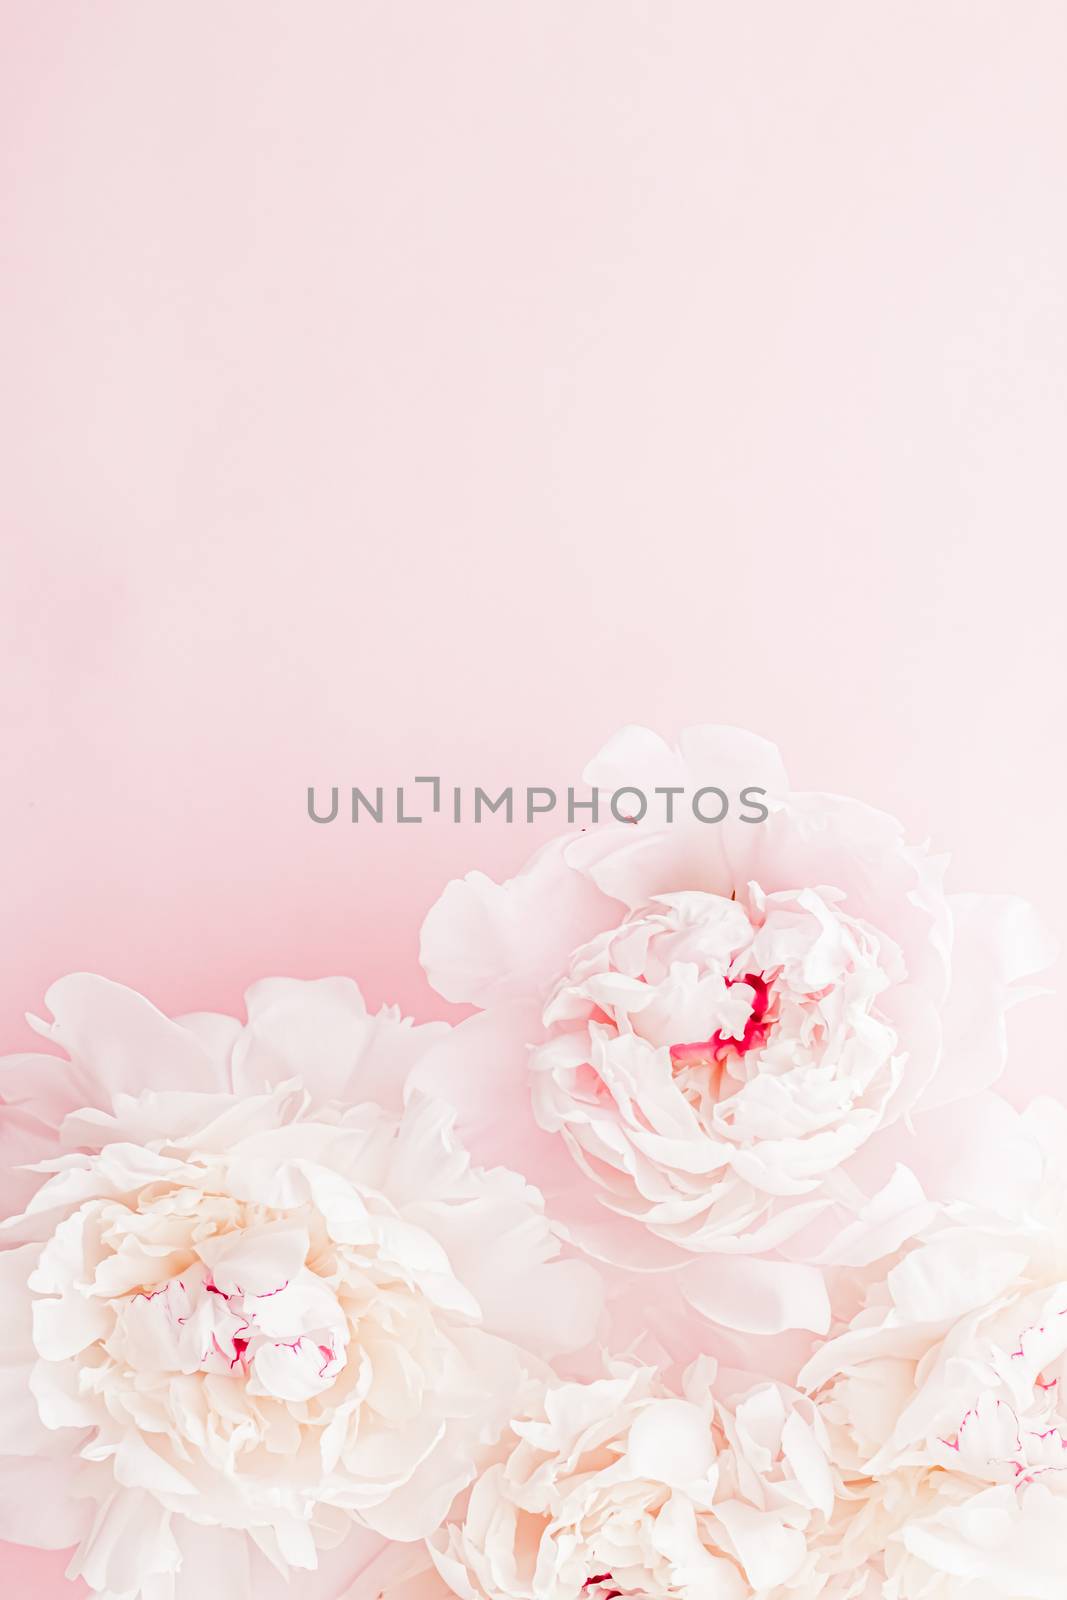 Peony flowers in bloom as floral art on pink background, wedding flatlay and luxury branding by Anneleven